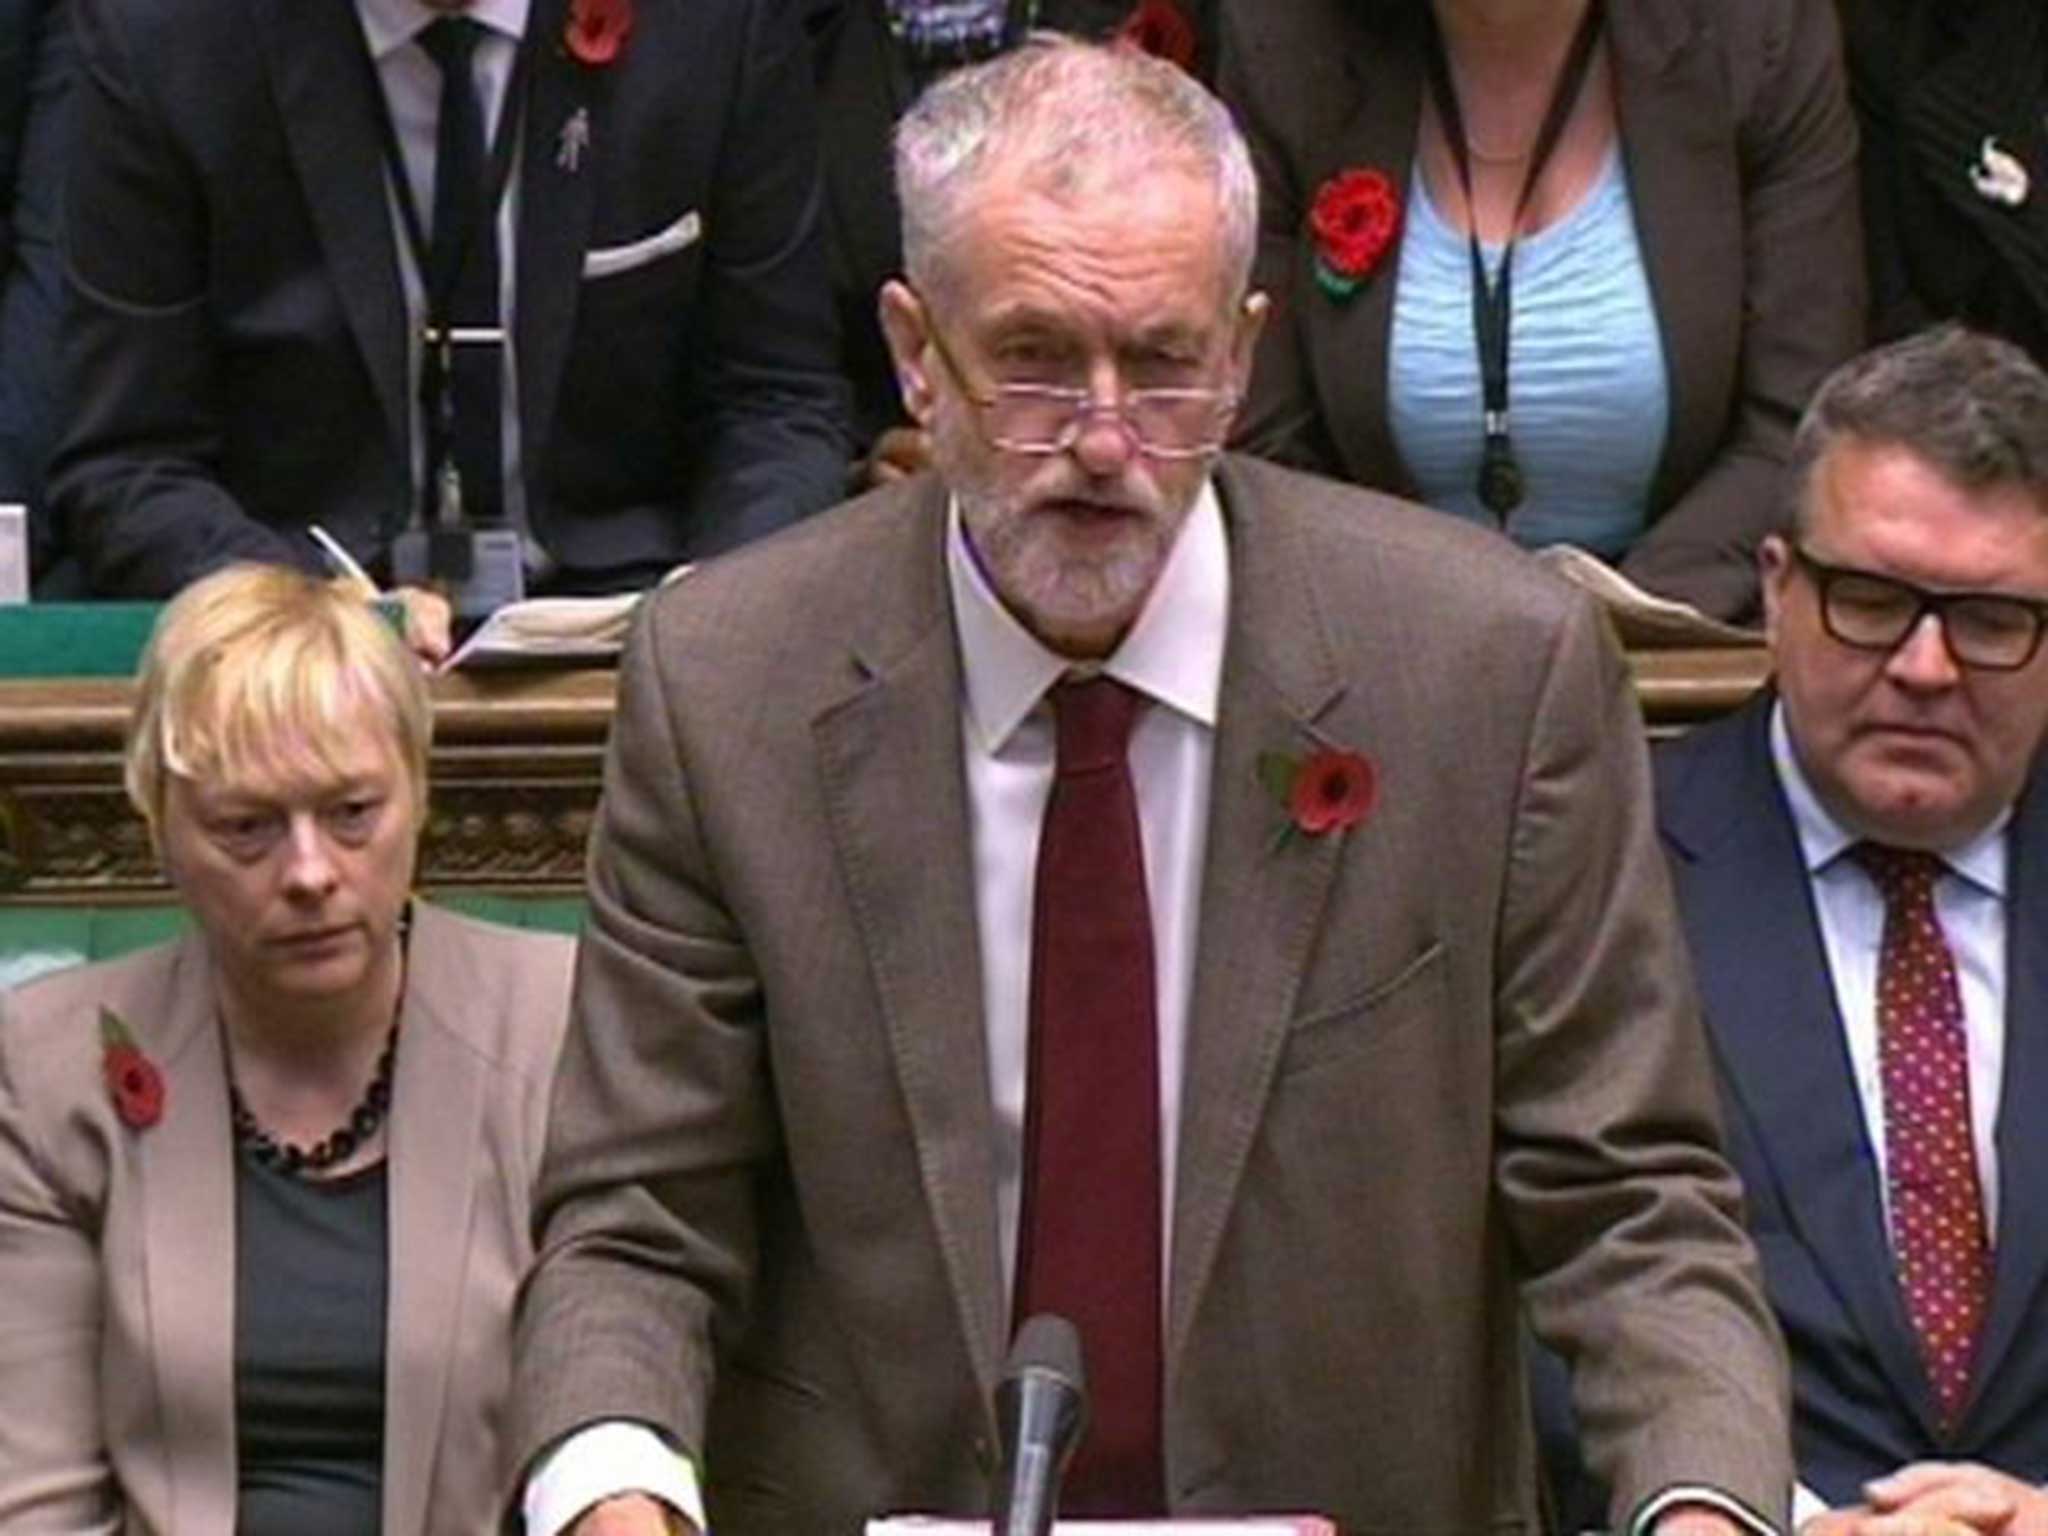 Corbyn's latest performance in PMQs was well recieved